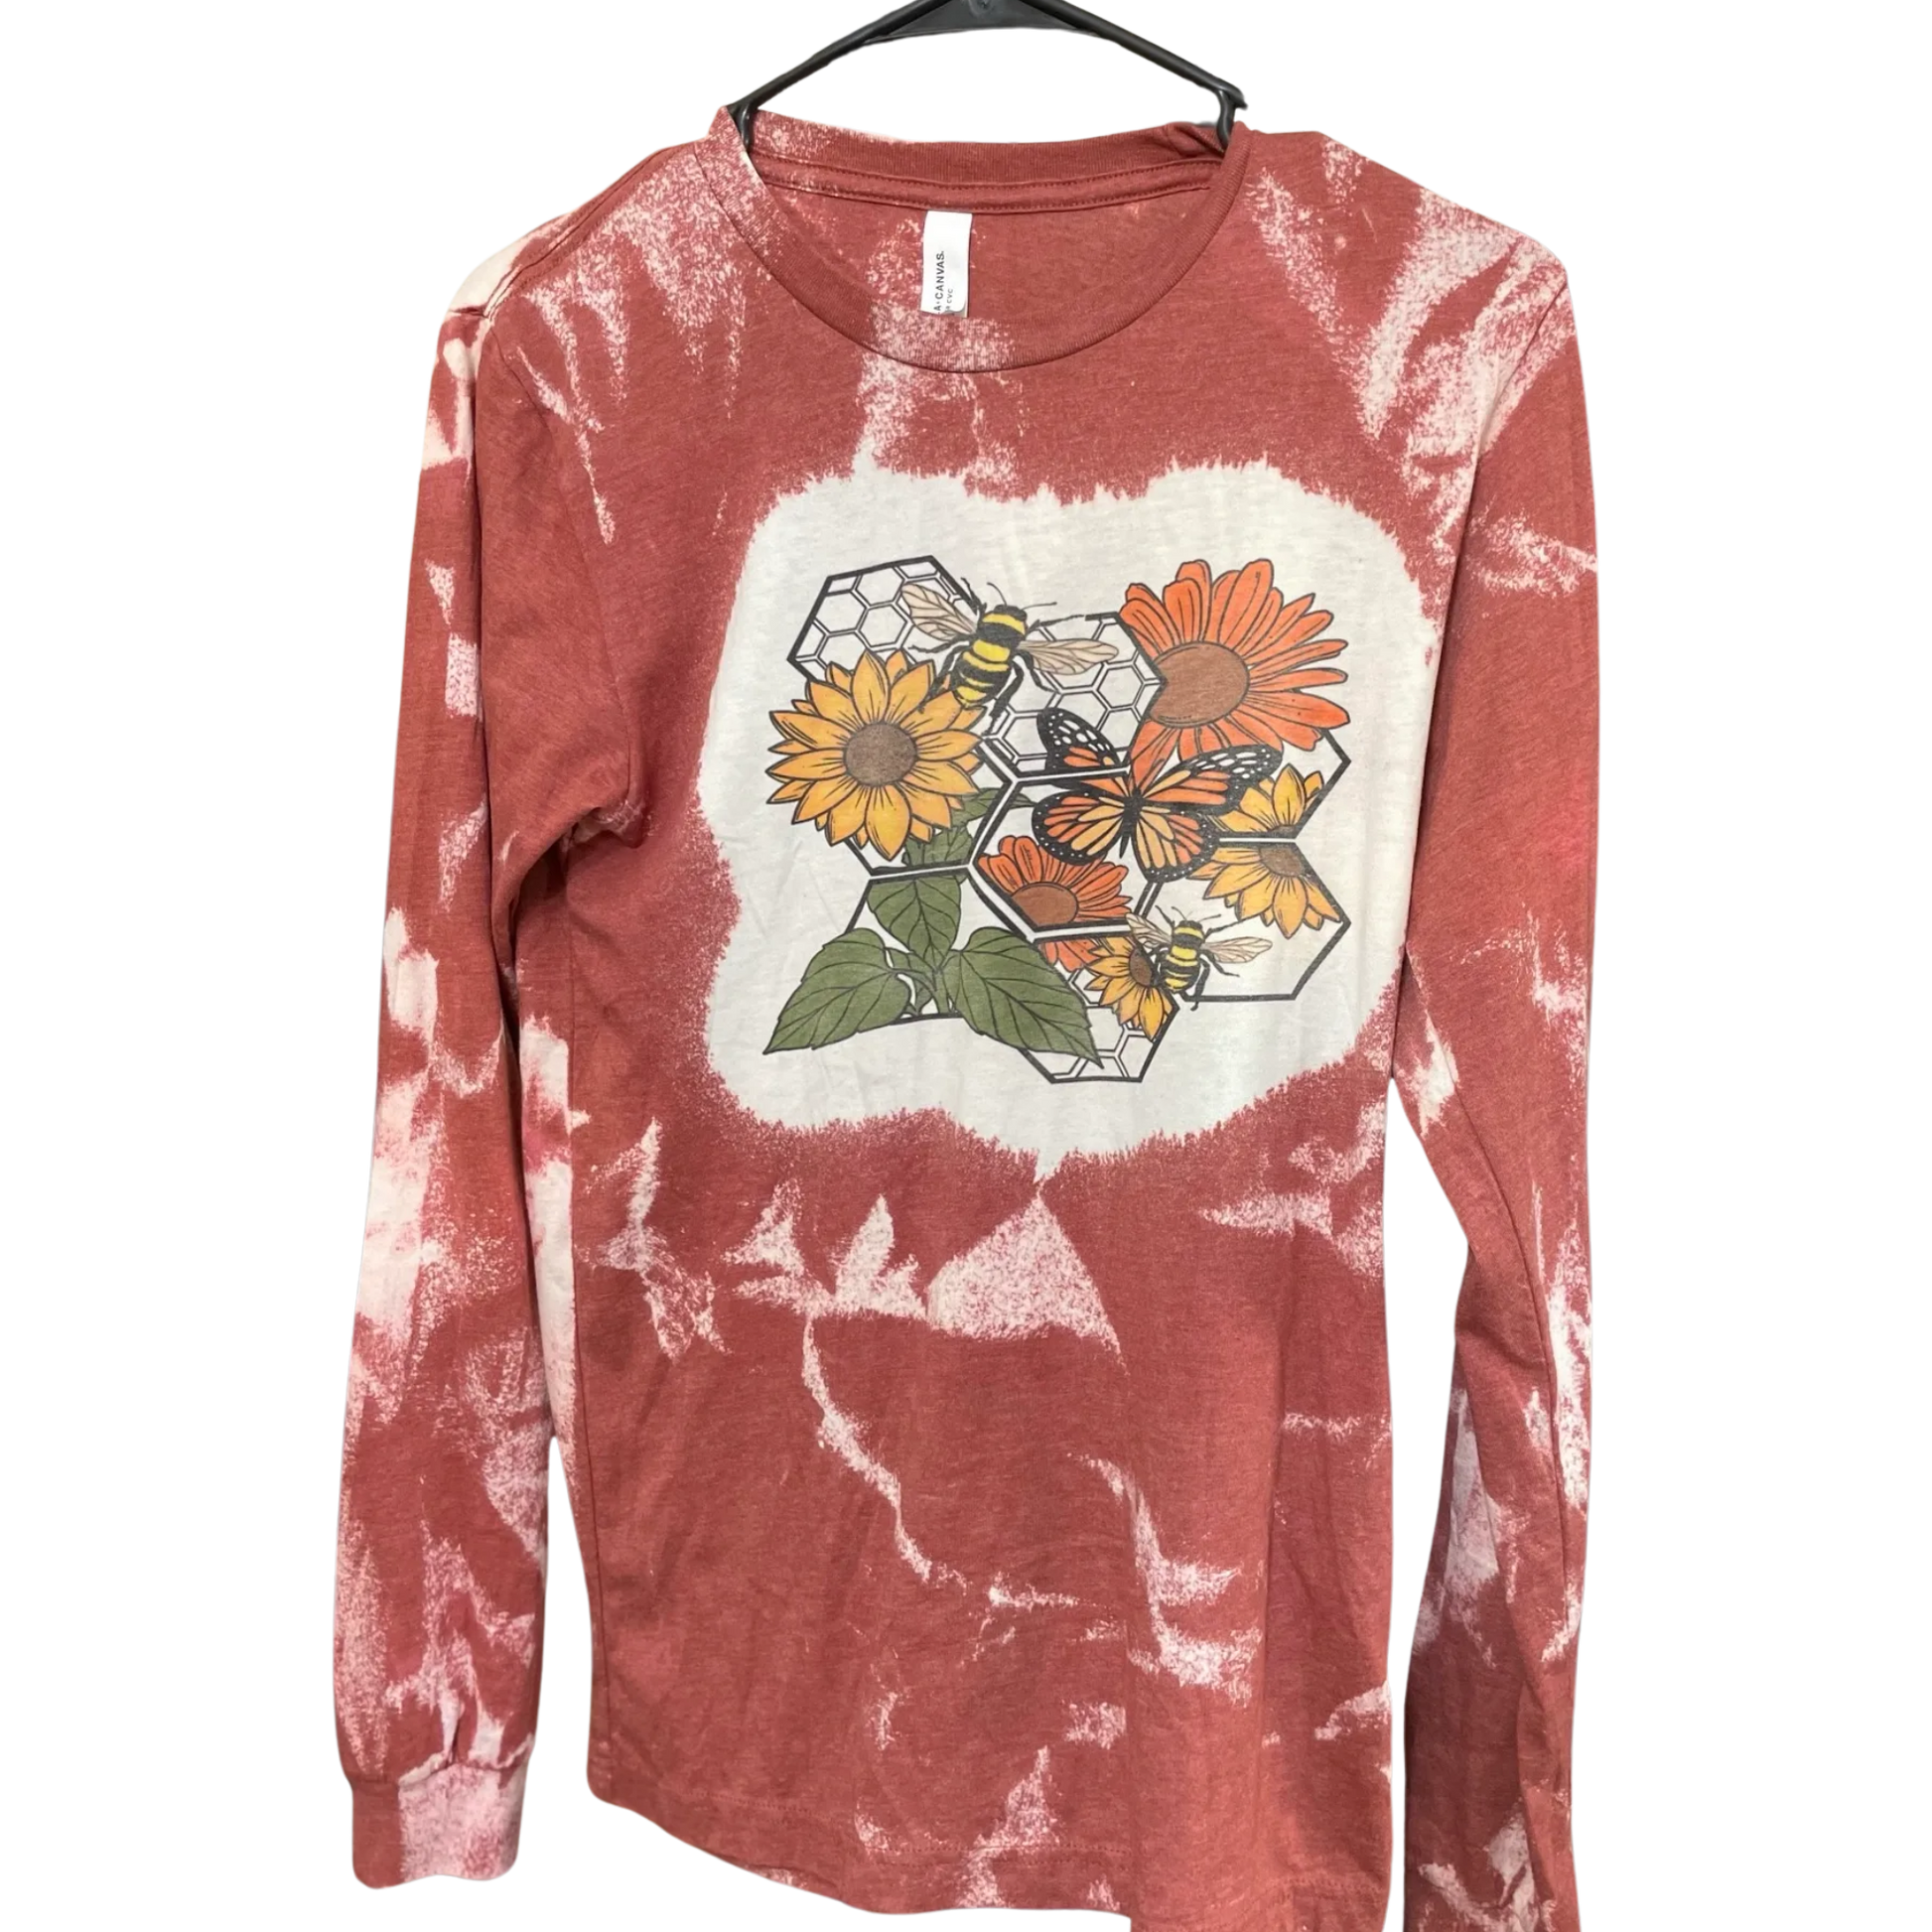 honeycomb, bees, and flowers long sleeve tee shirt